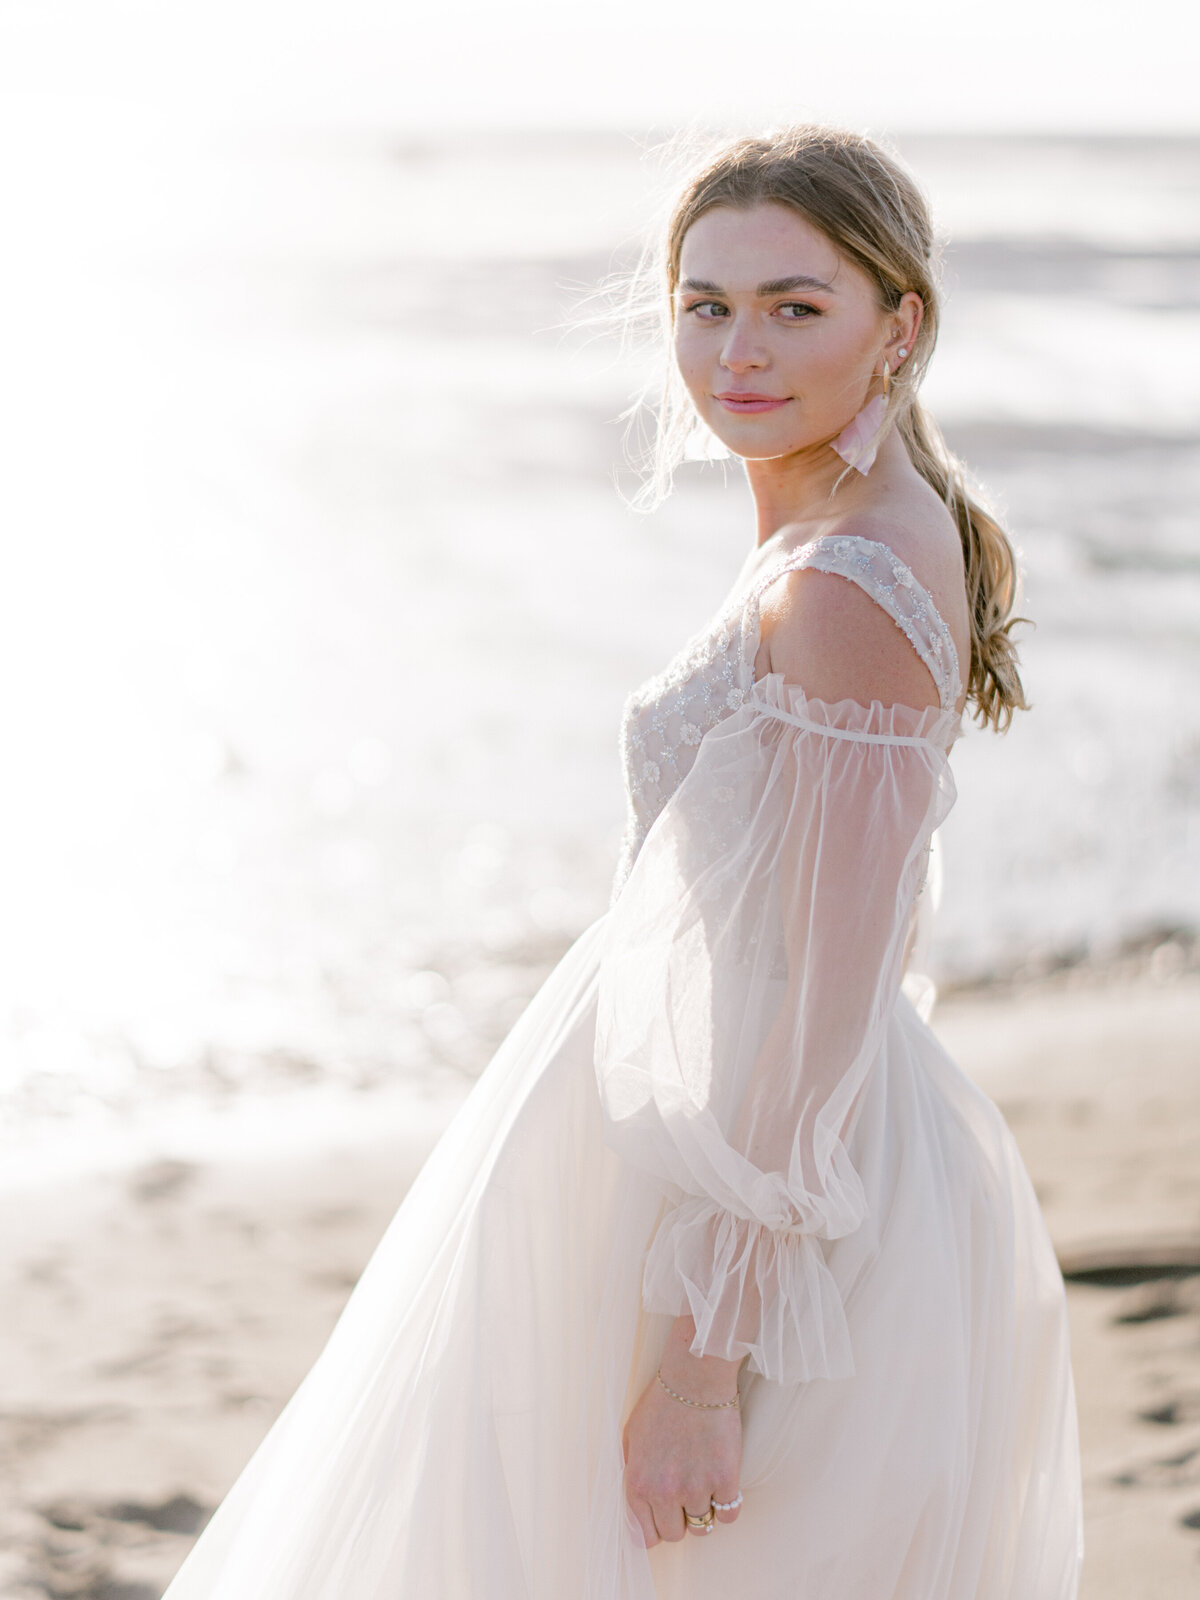 Stunning bride on the beach featuring hair and makeup by Allysa Helm Beauty, natural glam Vancouver & Ontario hair and makeup artist, featured on the Brontë Bride Vendor Guide.